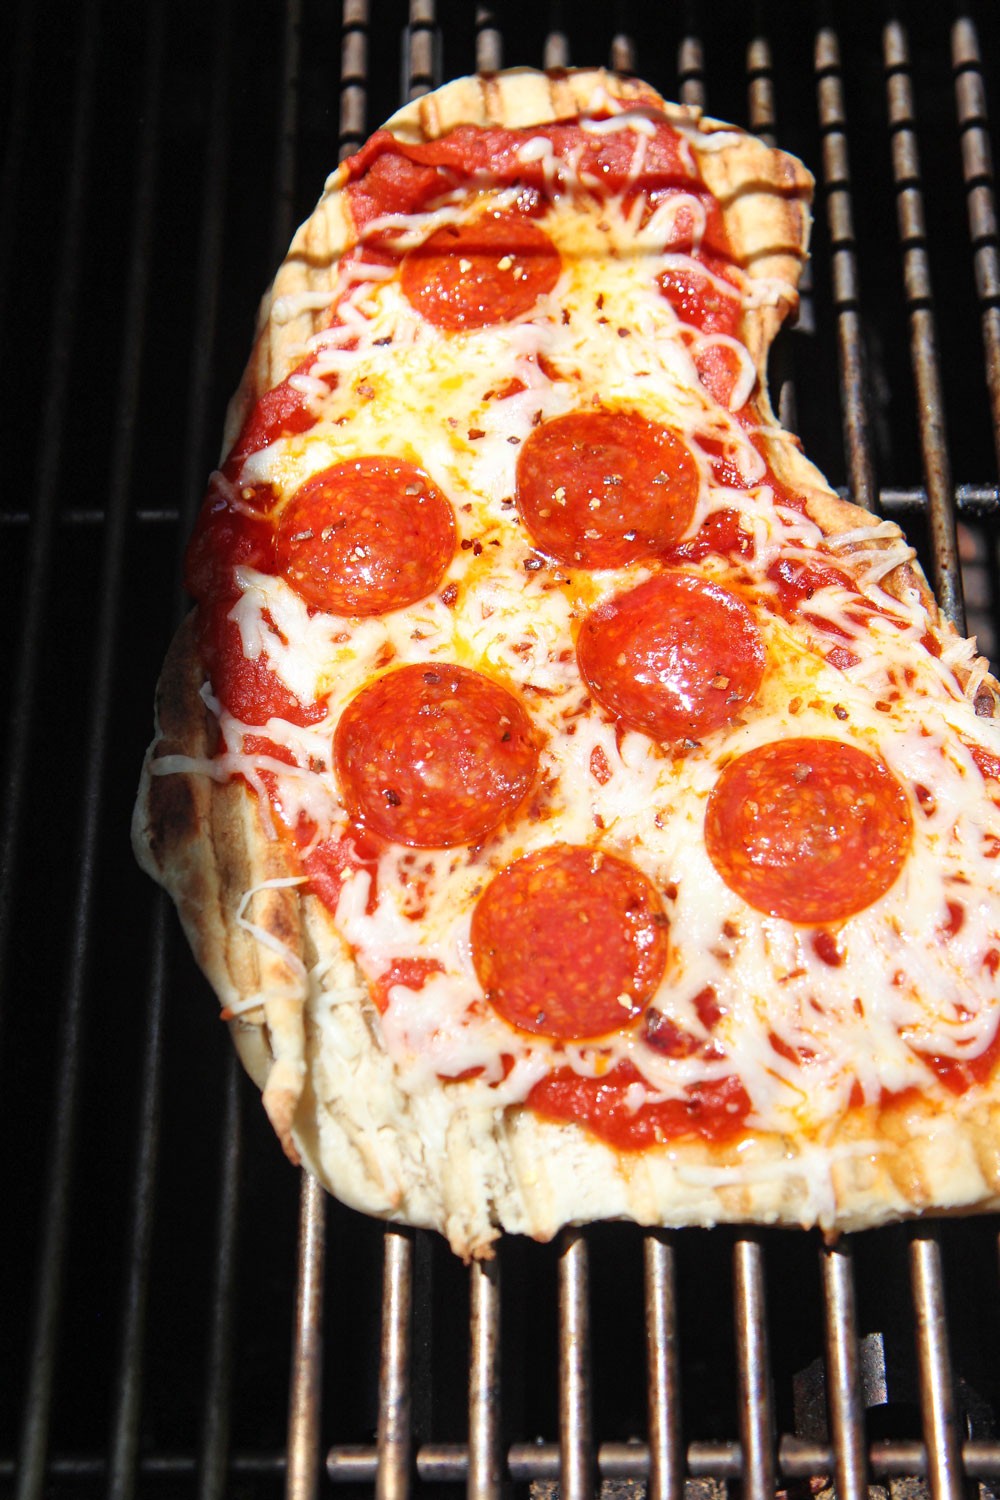 Honey Pepperoni Grilled Pizza Recipe. This is 6 minute super easy dinner. THe whole pizza is done before your oven gets hot. Grab pizza dough, tomato sauce, cheese, and pepperoni. Also honey and red pepper flakes spices it up. Happy pizza making! www.ChopHappy.com #pizzarecipe #grilledpizza